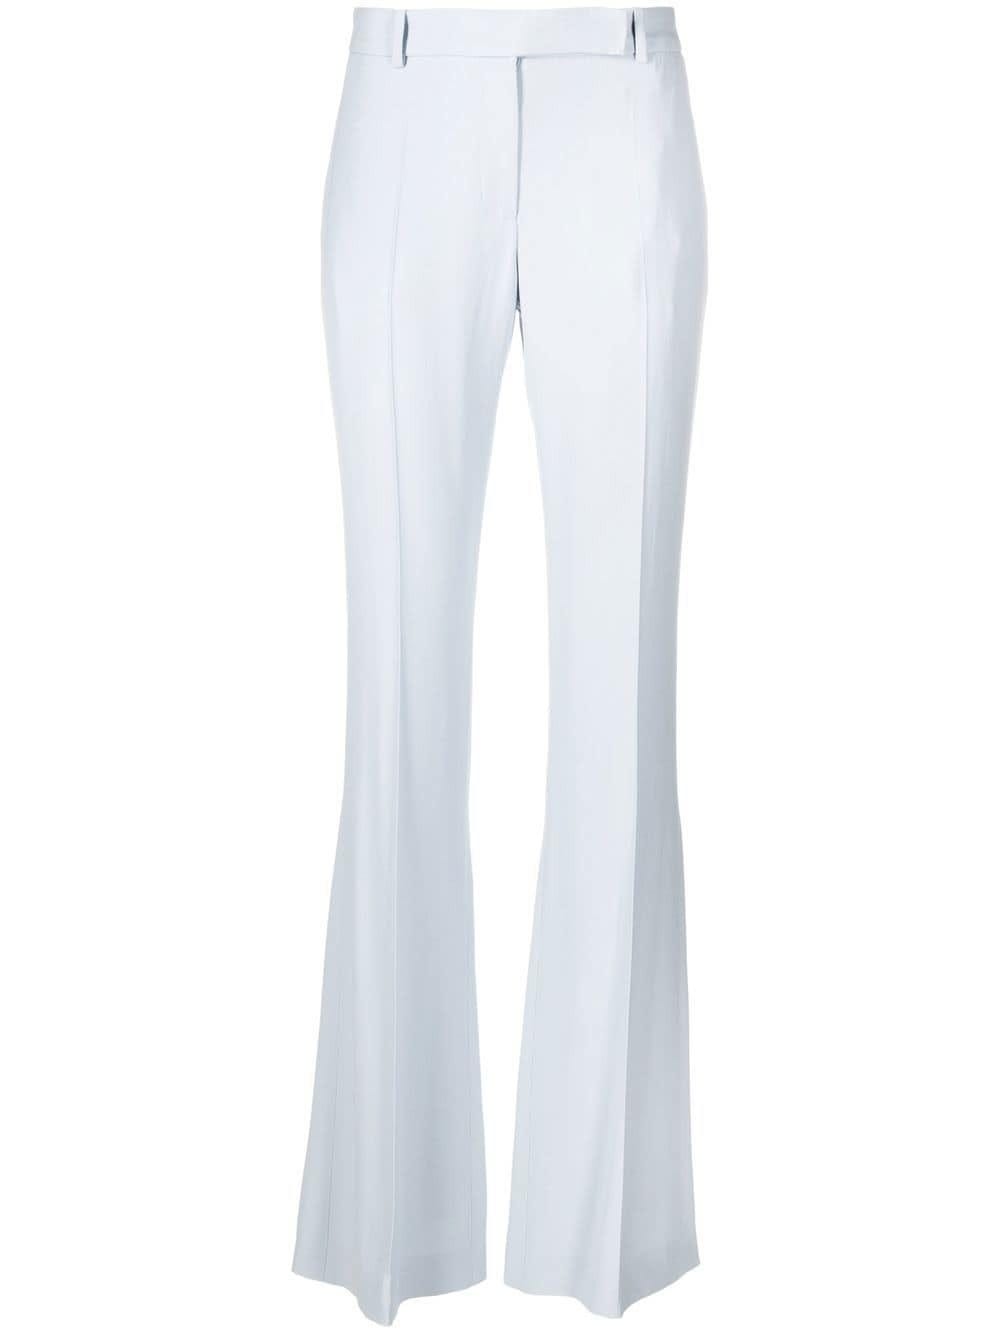 ALEXANDER MCQUEEN LIGHT BLUE TAILORED FLARED TROUSERS